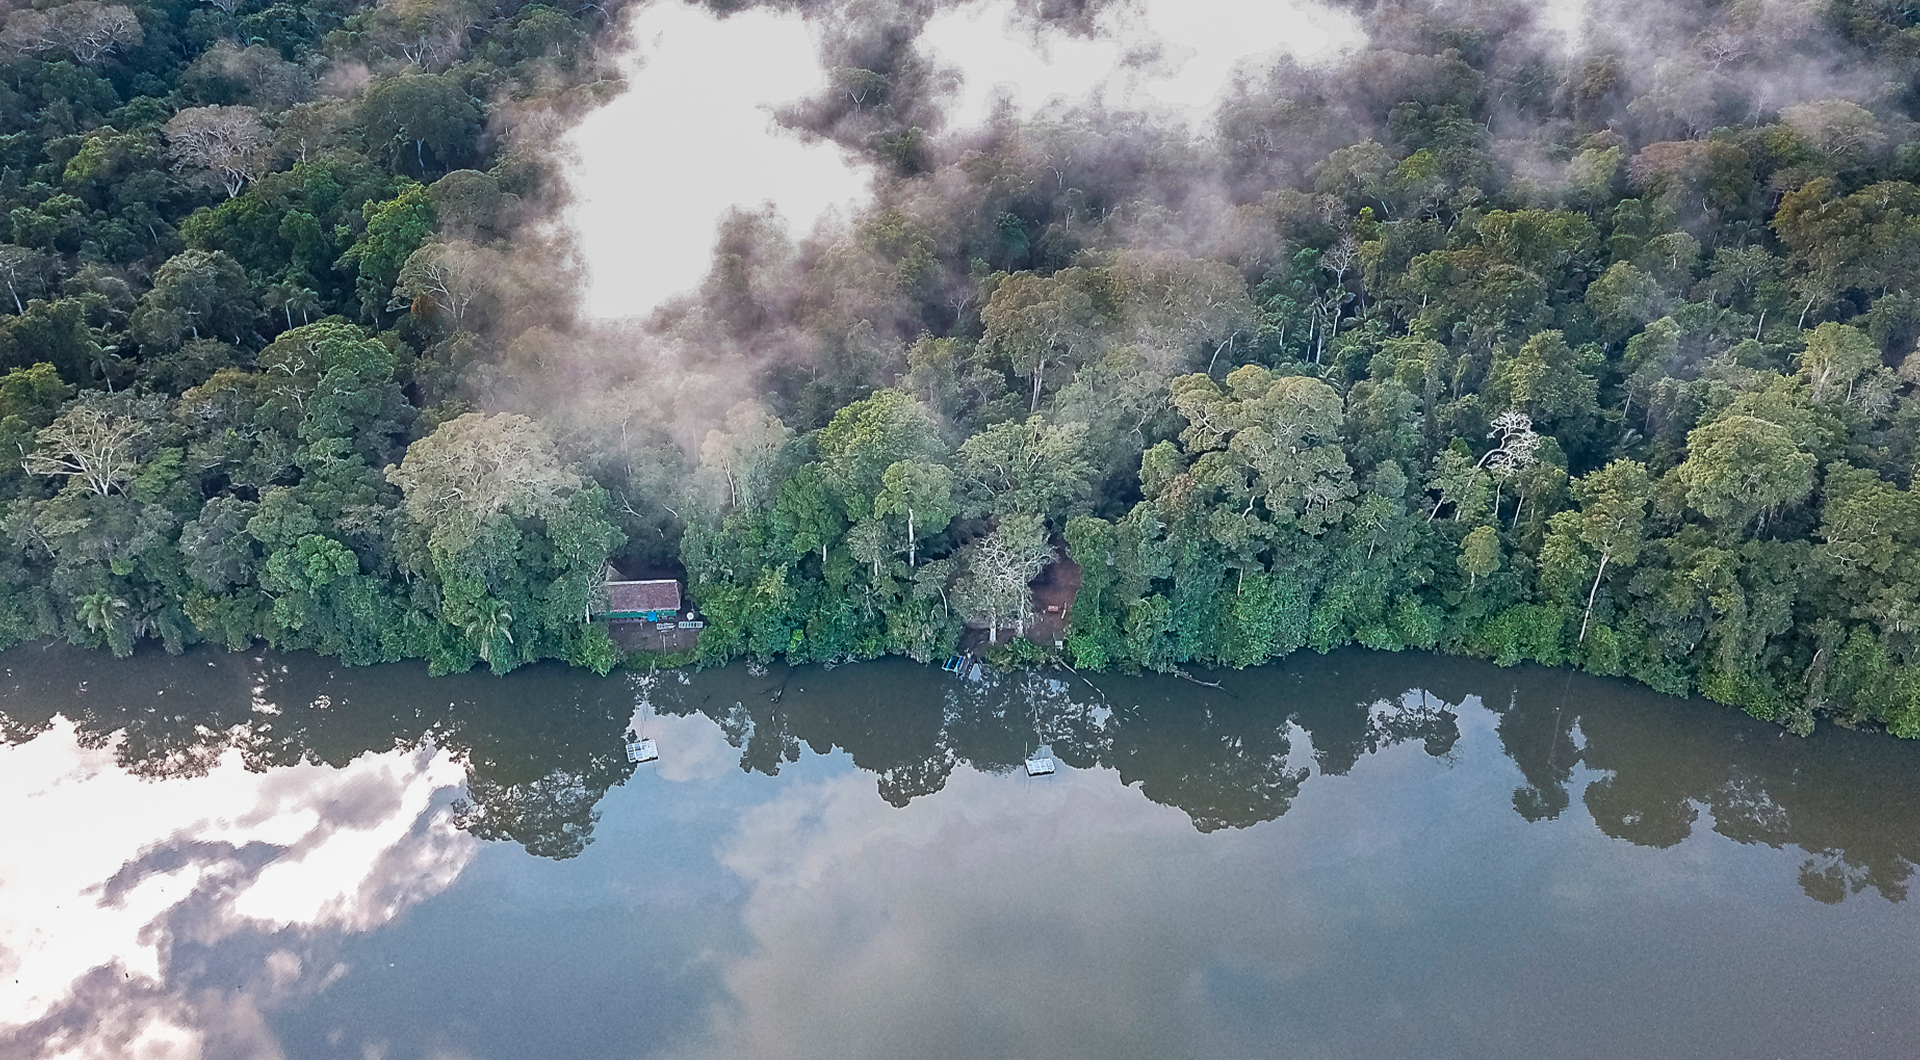 An aerial view of the amazon river with forest in the background and a small building.